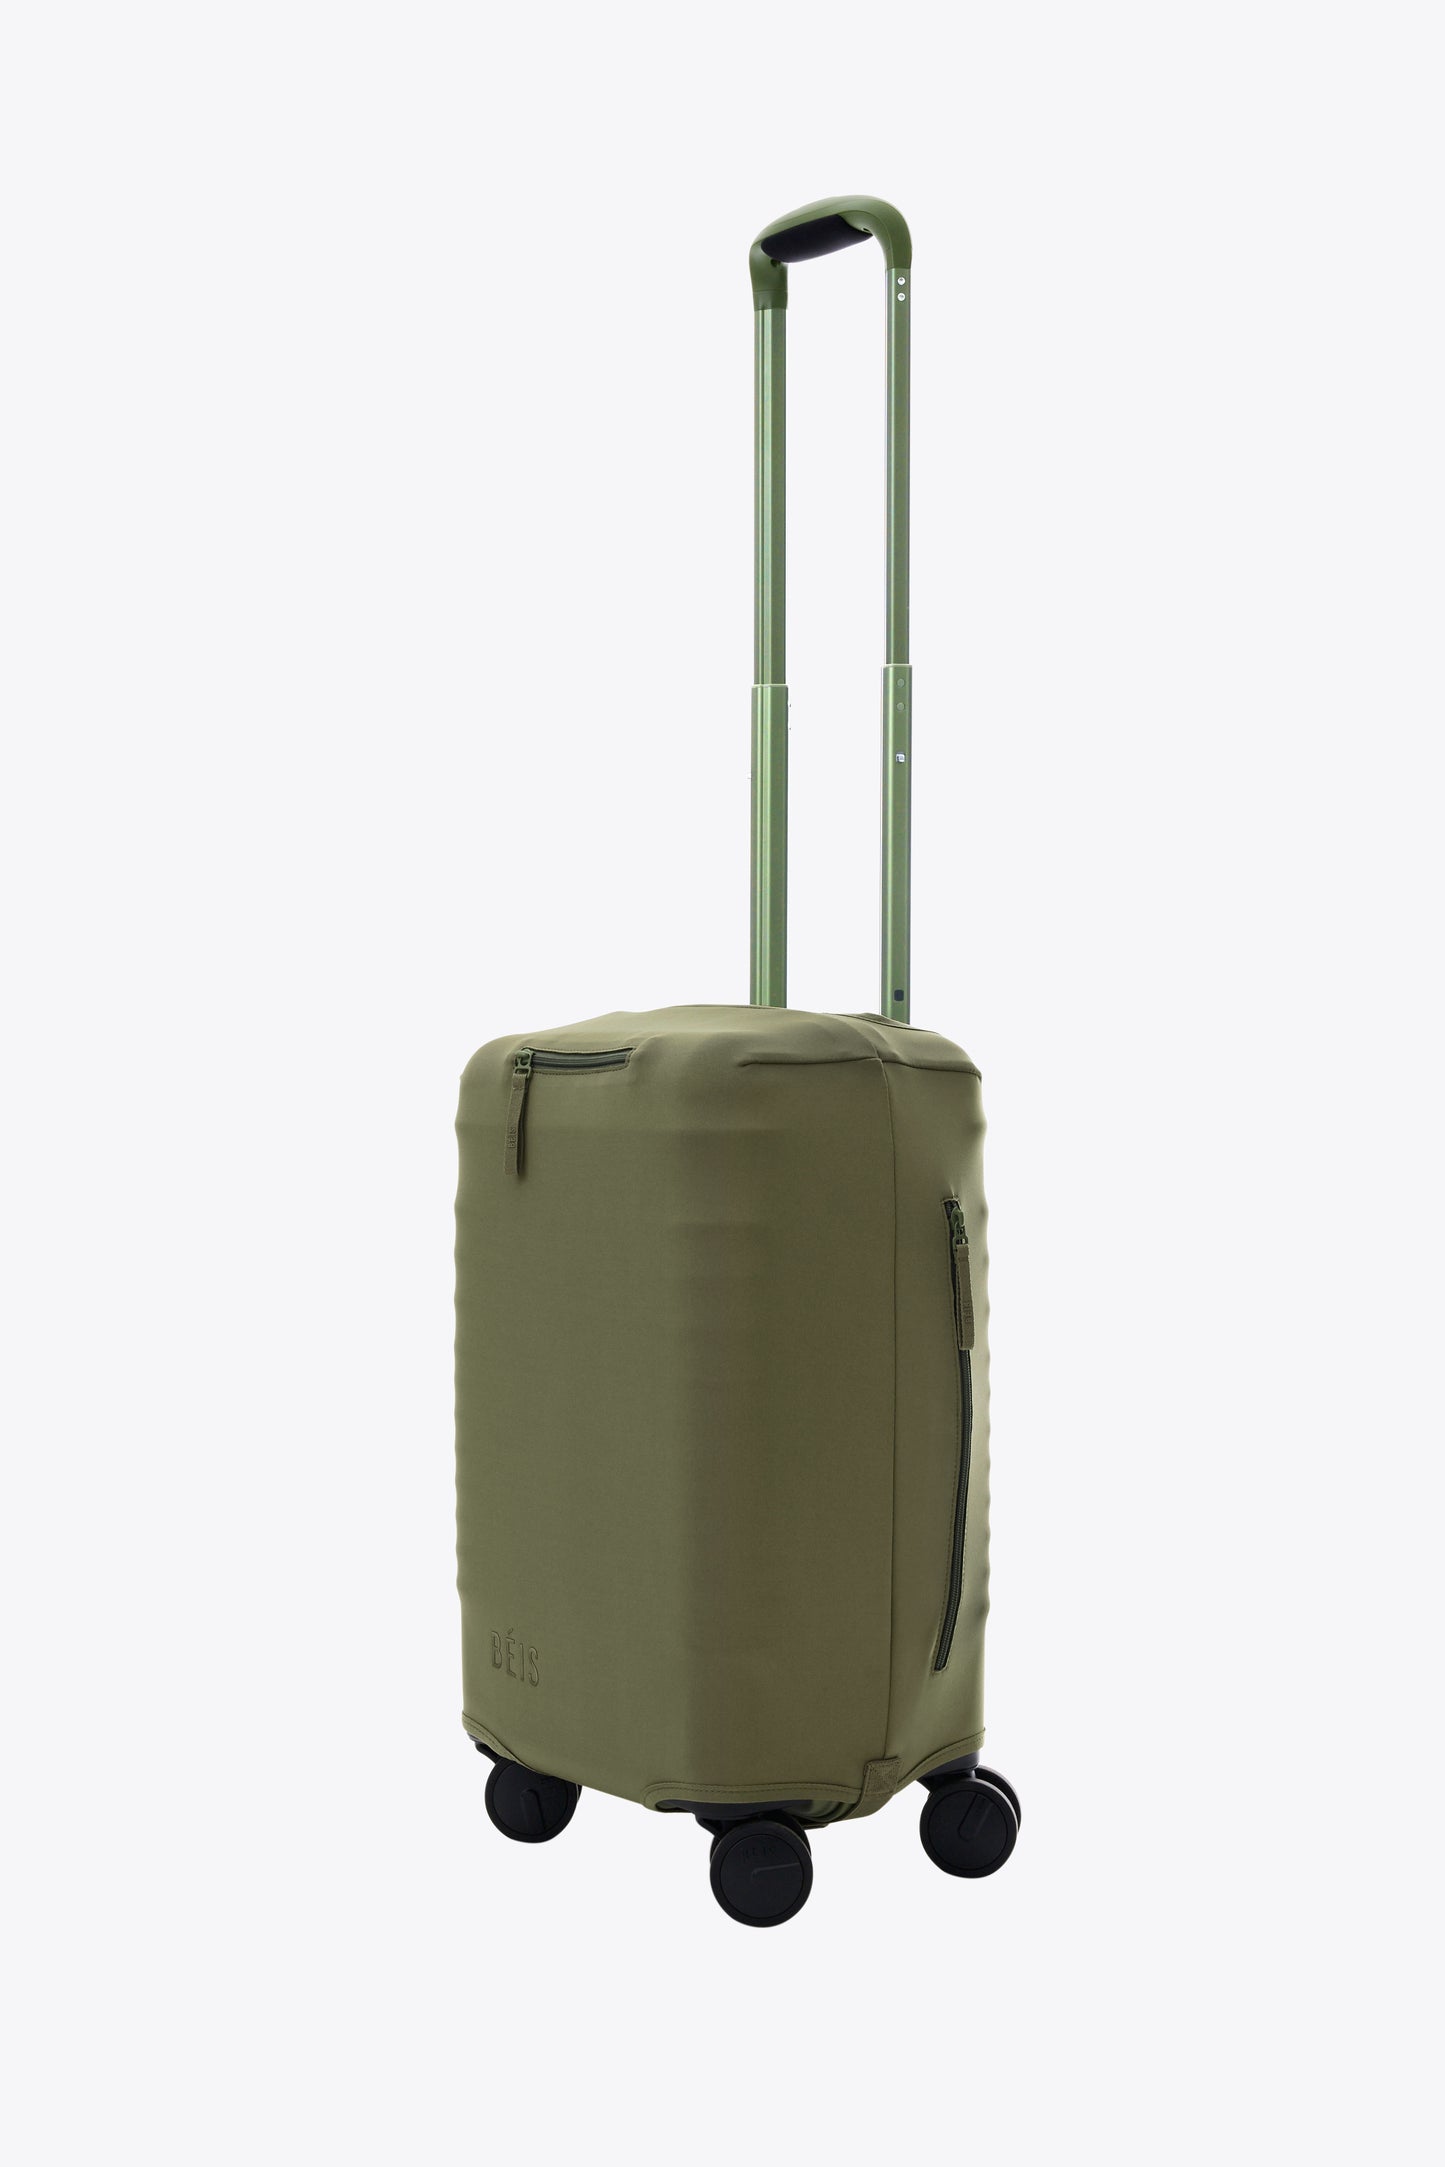 The Small Carry-On Luggage Cover in Olive